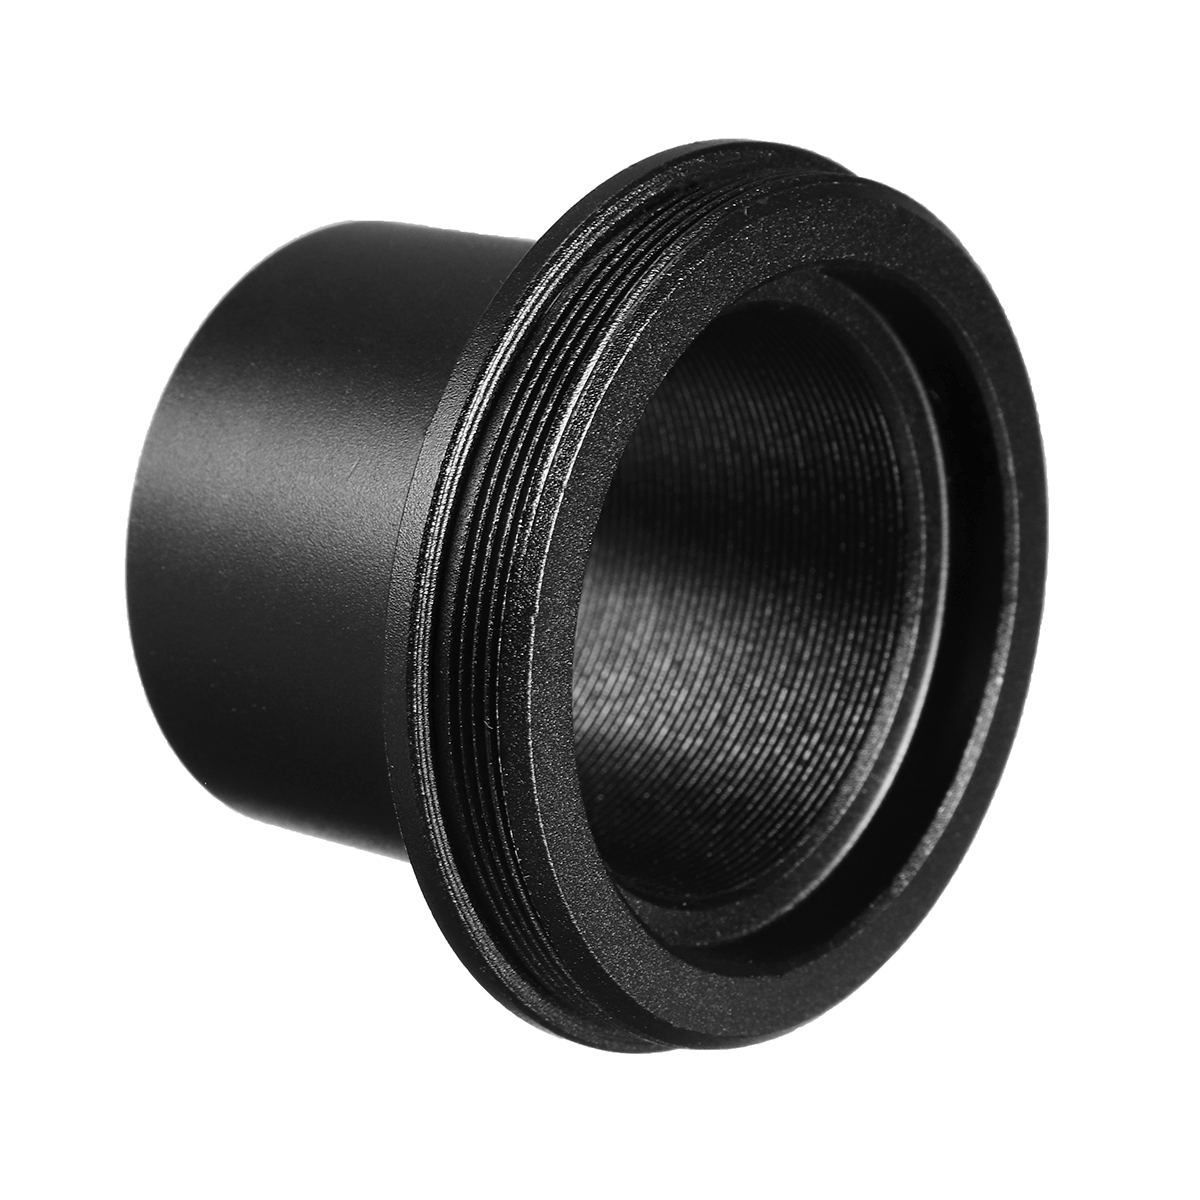 125inch-Black-Extension-Tube-And-Astronomical-Telescope-Mount-Adapter-For-Canon-Camera-1337723